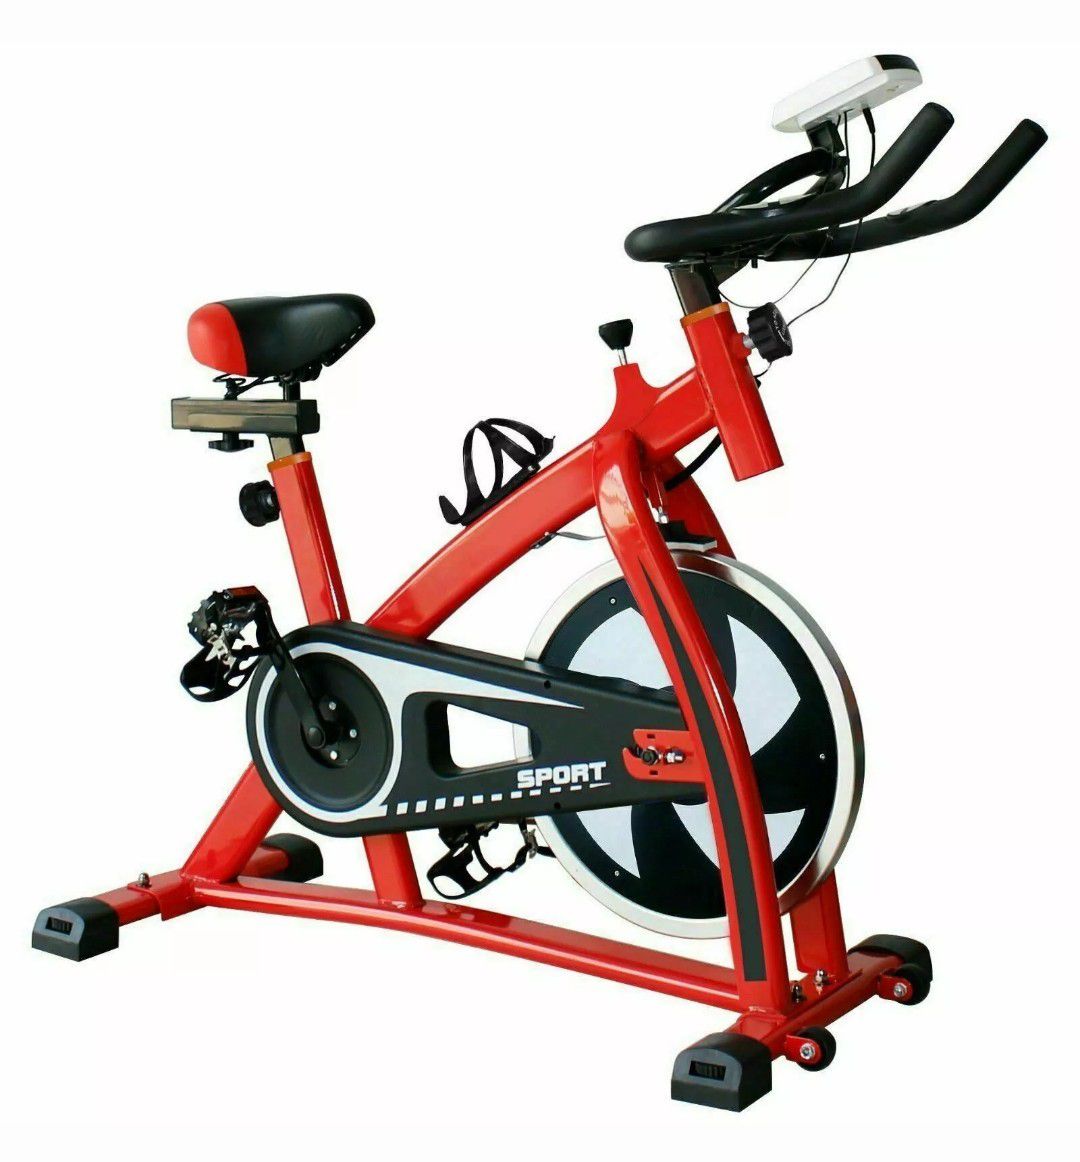 2019 New Red Spinning bike Cardio Workout